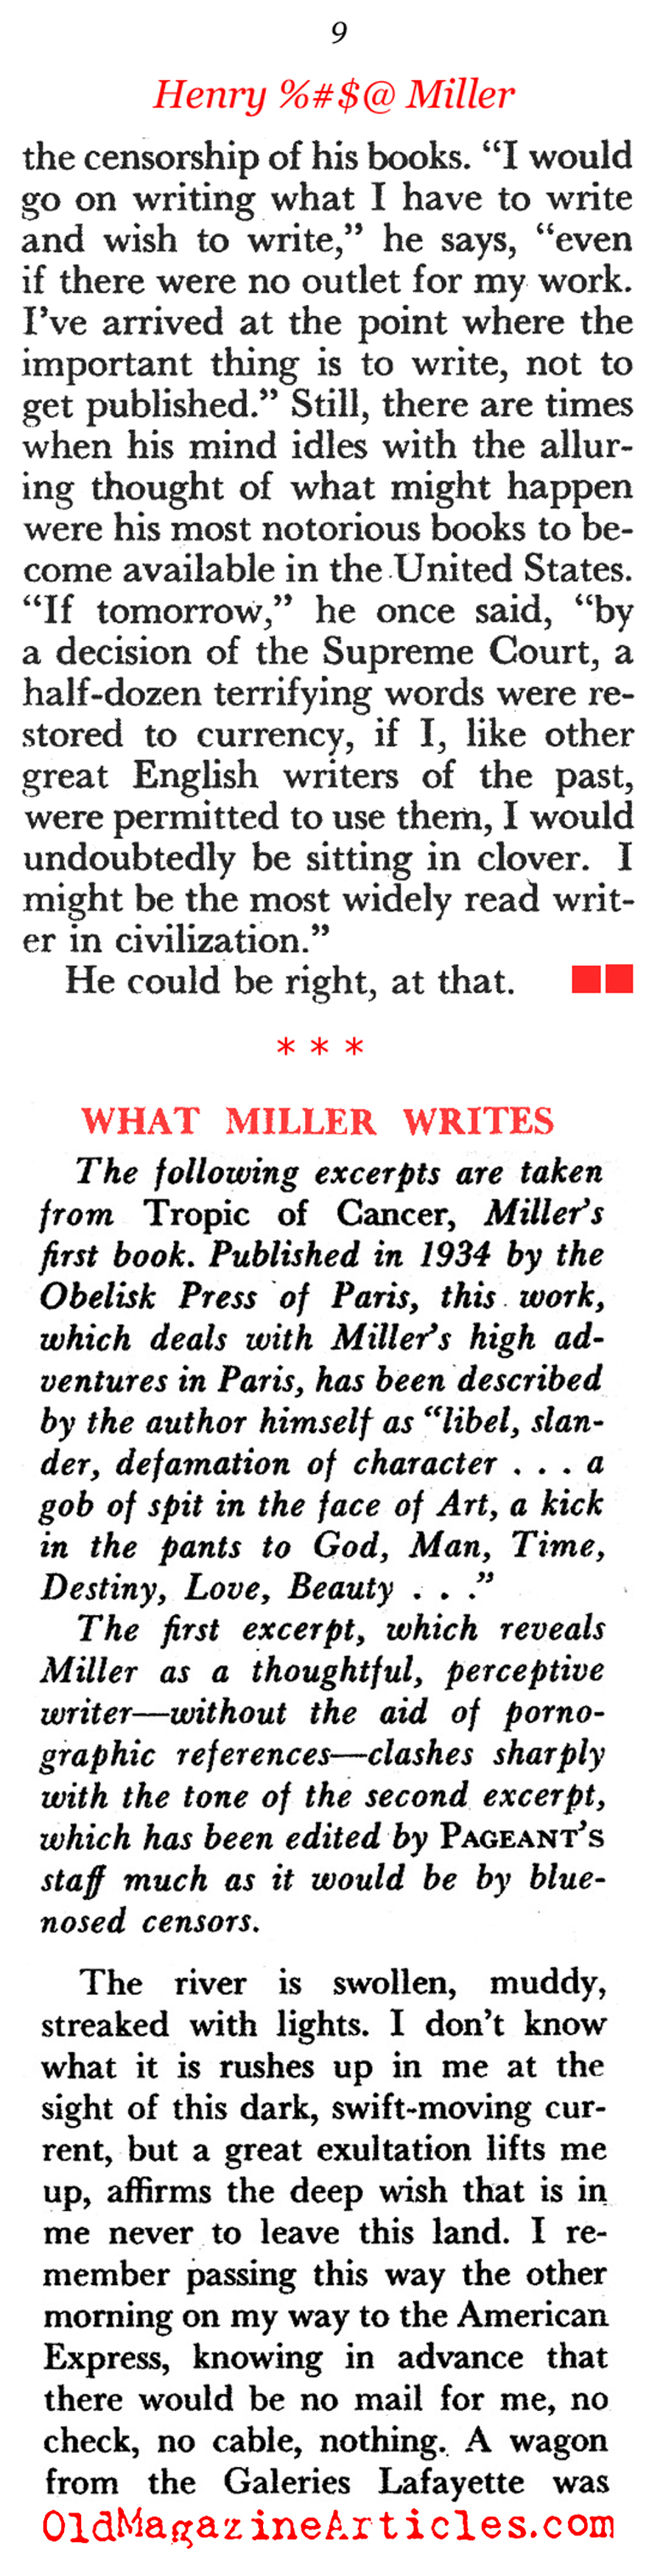 Henry Miller (Pageant Magazine, 1958)